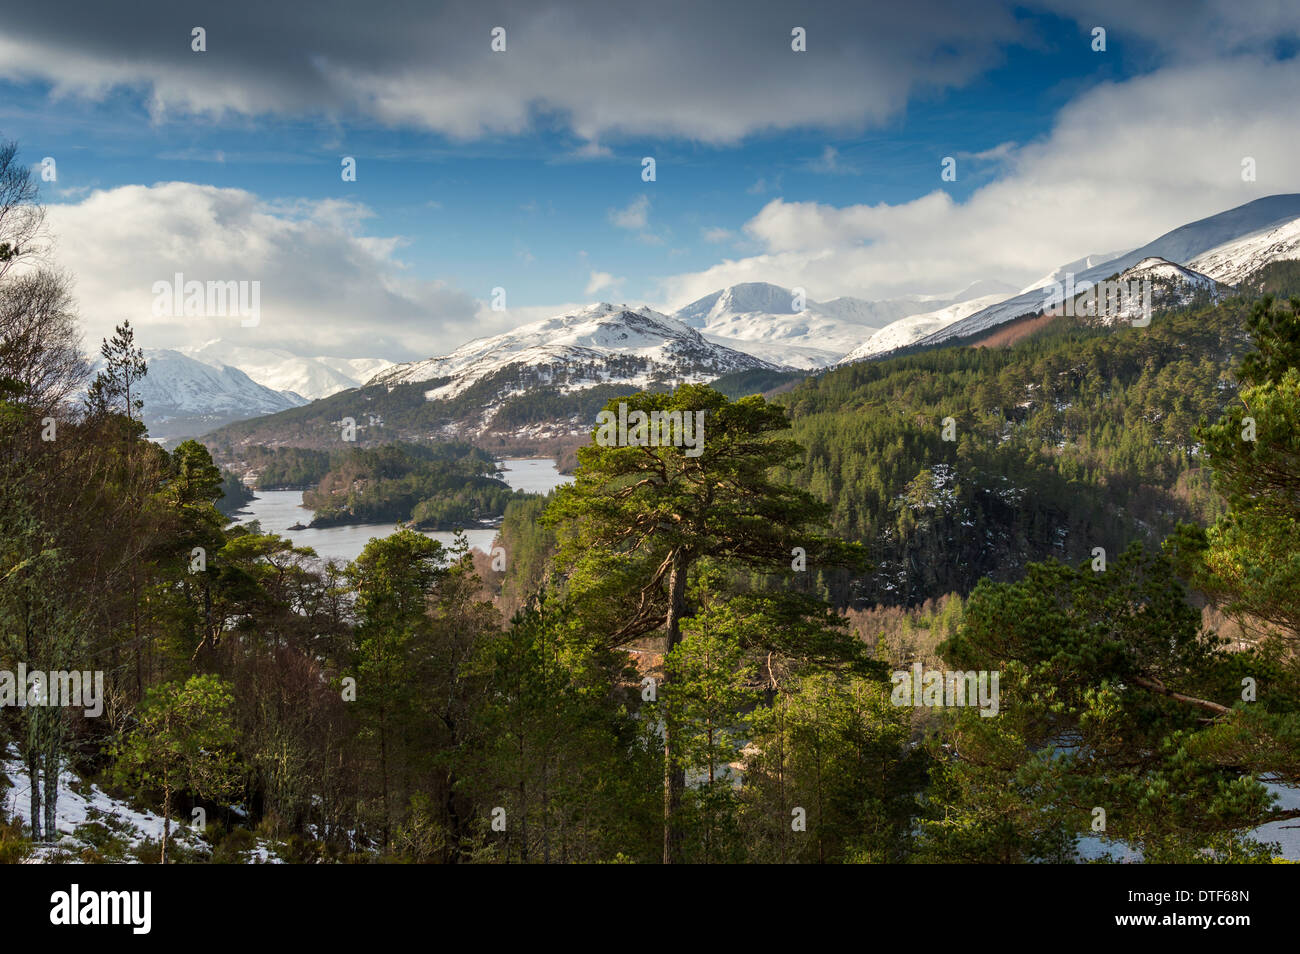 GLEN AFFRIC SCOTLAND WITH MOUNTAINS COVERED IN WINTER SNOW CALEDONIAN PINE TREE ON THE HILLSIDES AND THE LOCHS IN THE DISTANCE Stock Photo